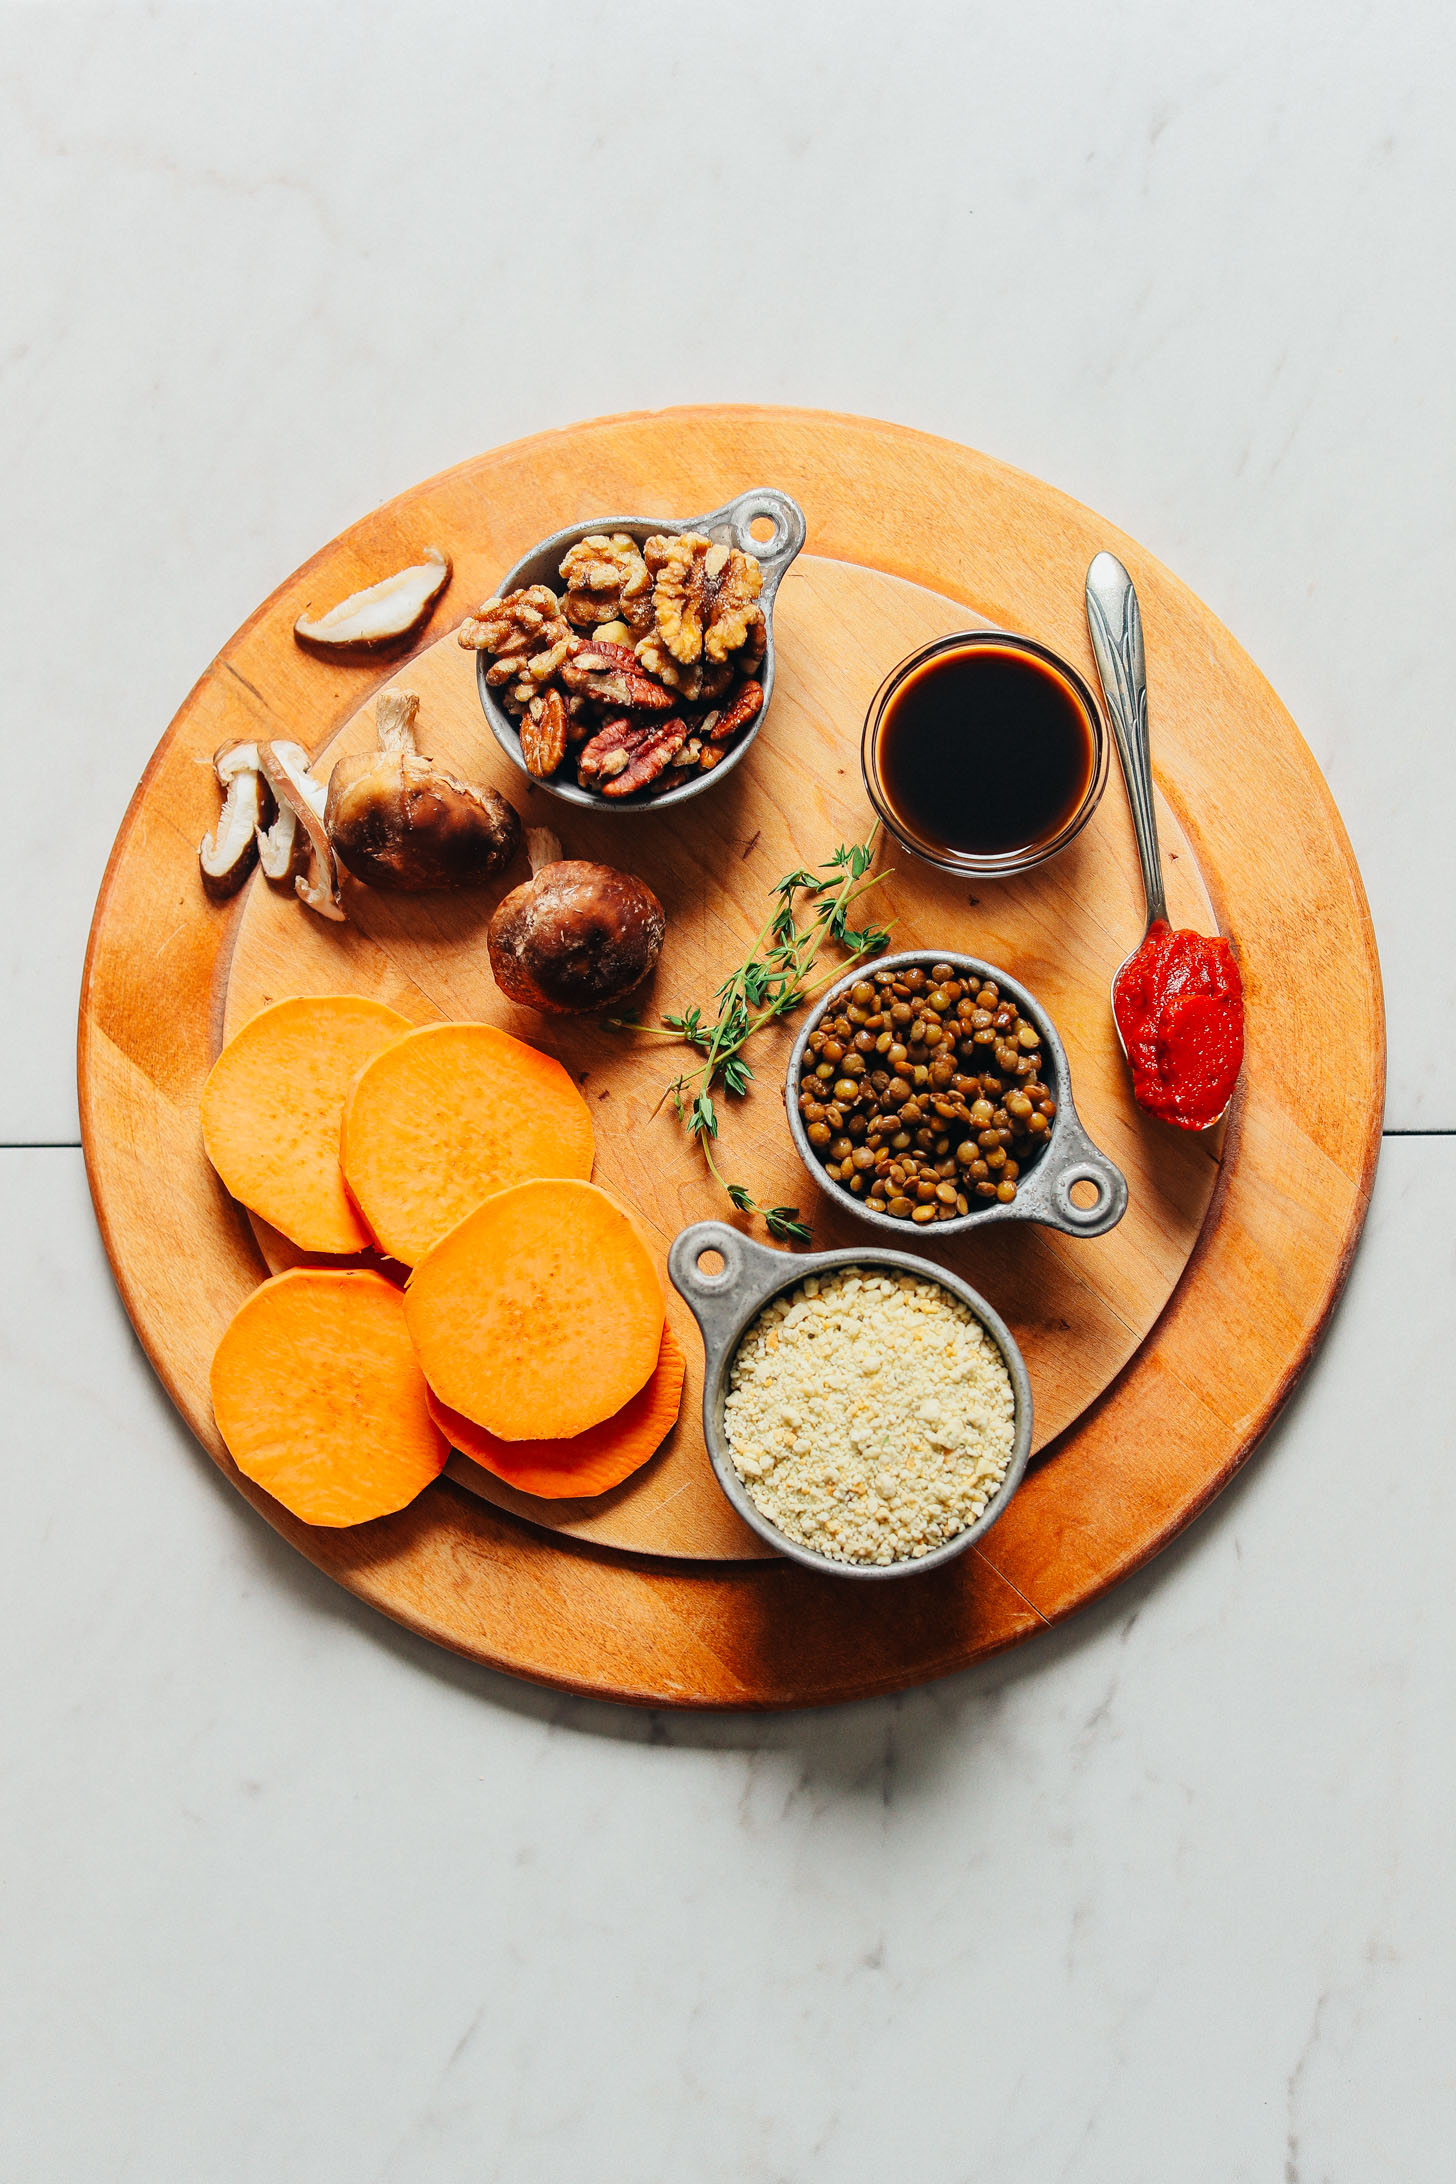 Wood cutting board filled with lentils, sweet potatoes, and other ingredients for making vegan meatloaf